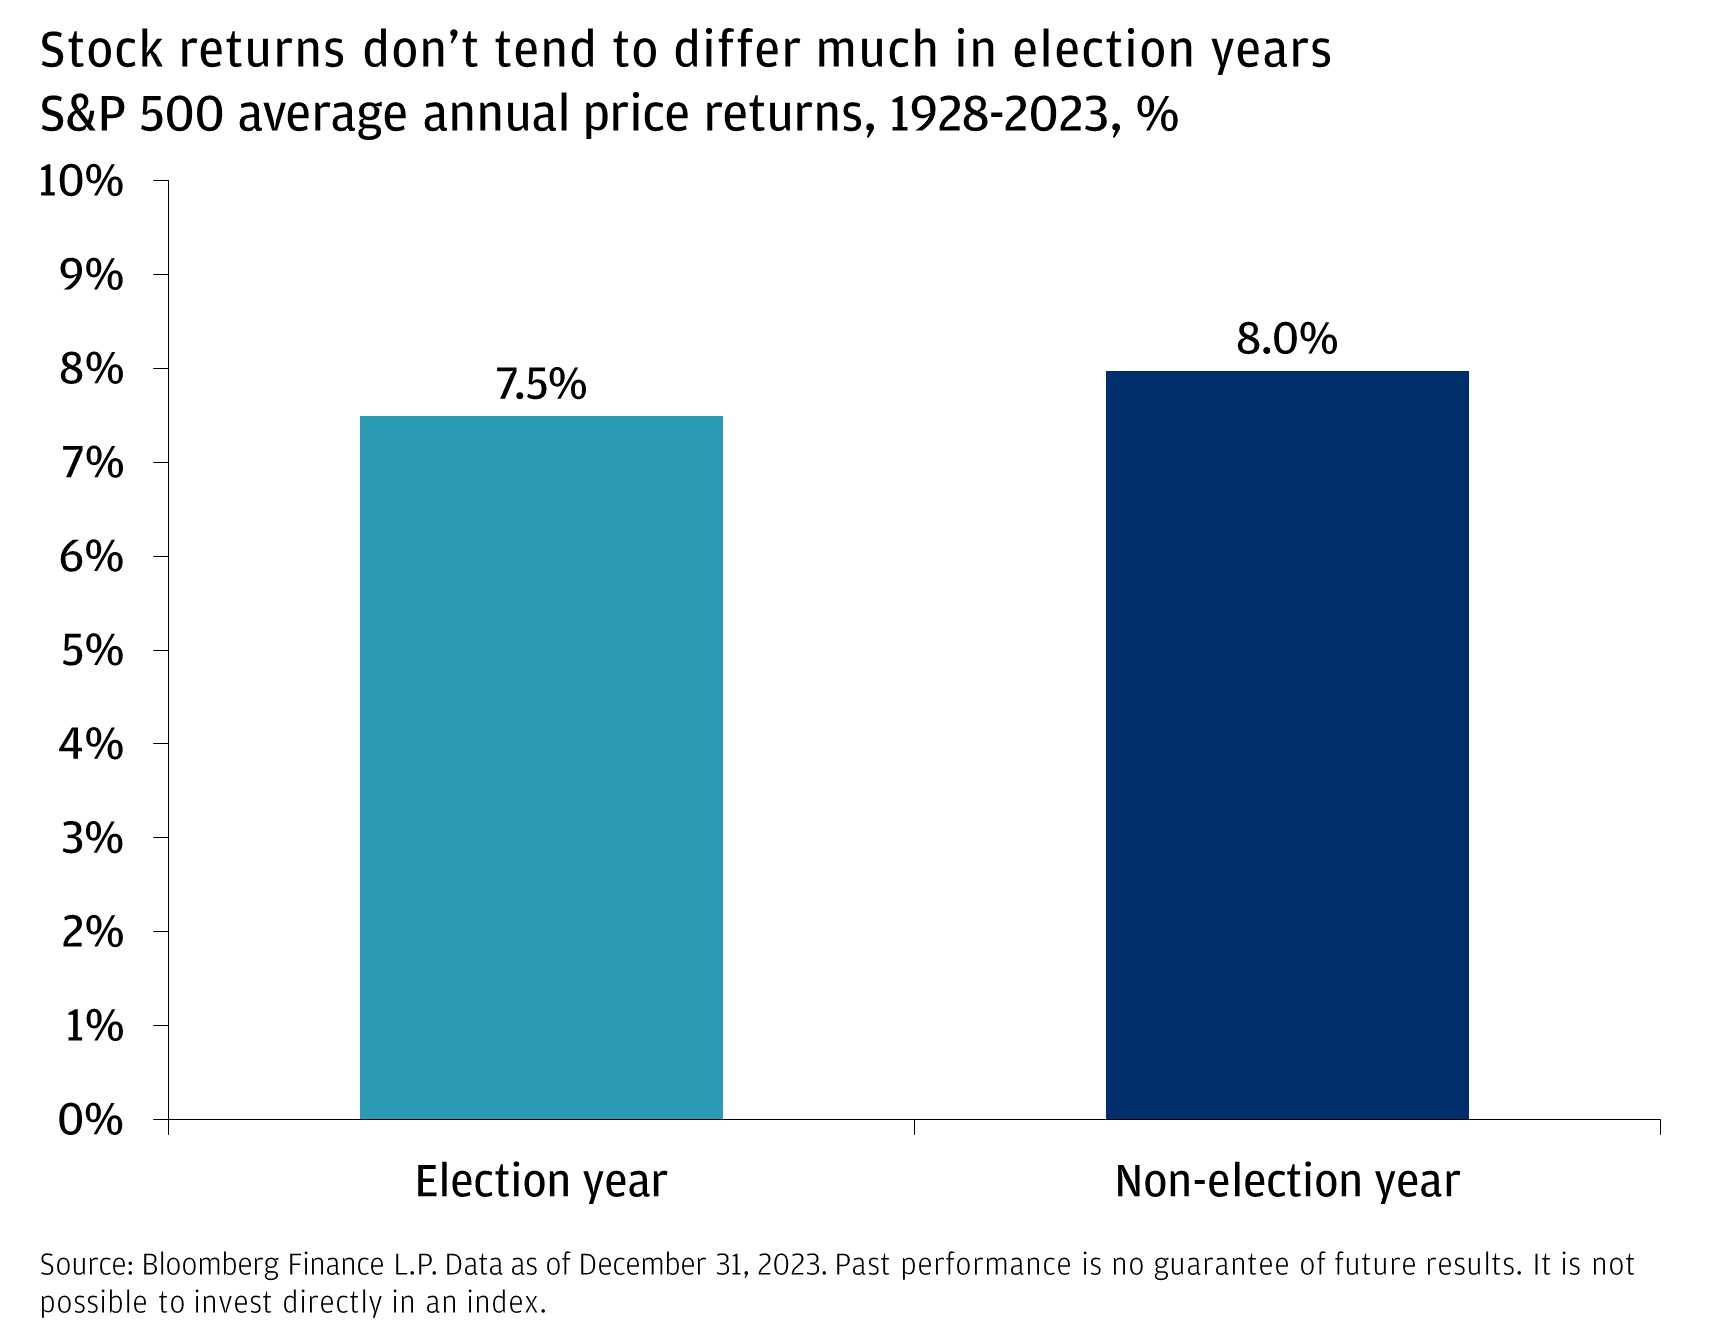 The chart shows the S&P 500 average annual price returns from 1926-2023 in election years versus non-election years.